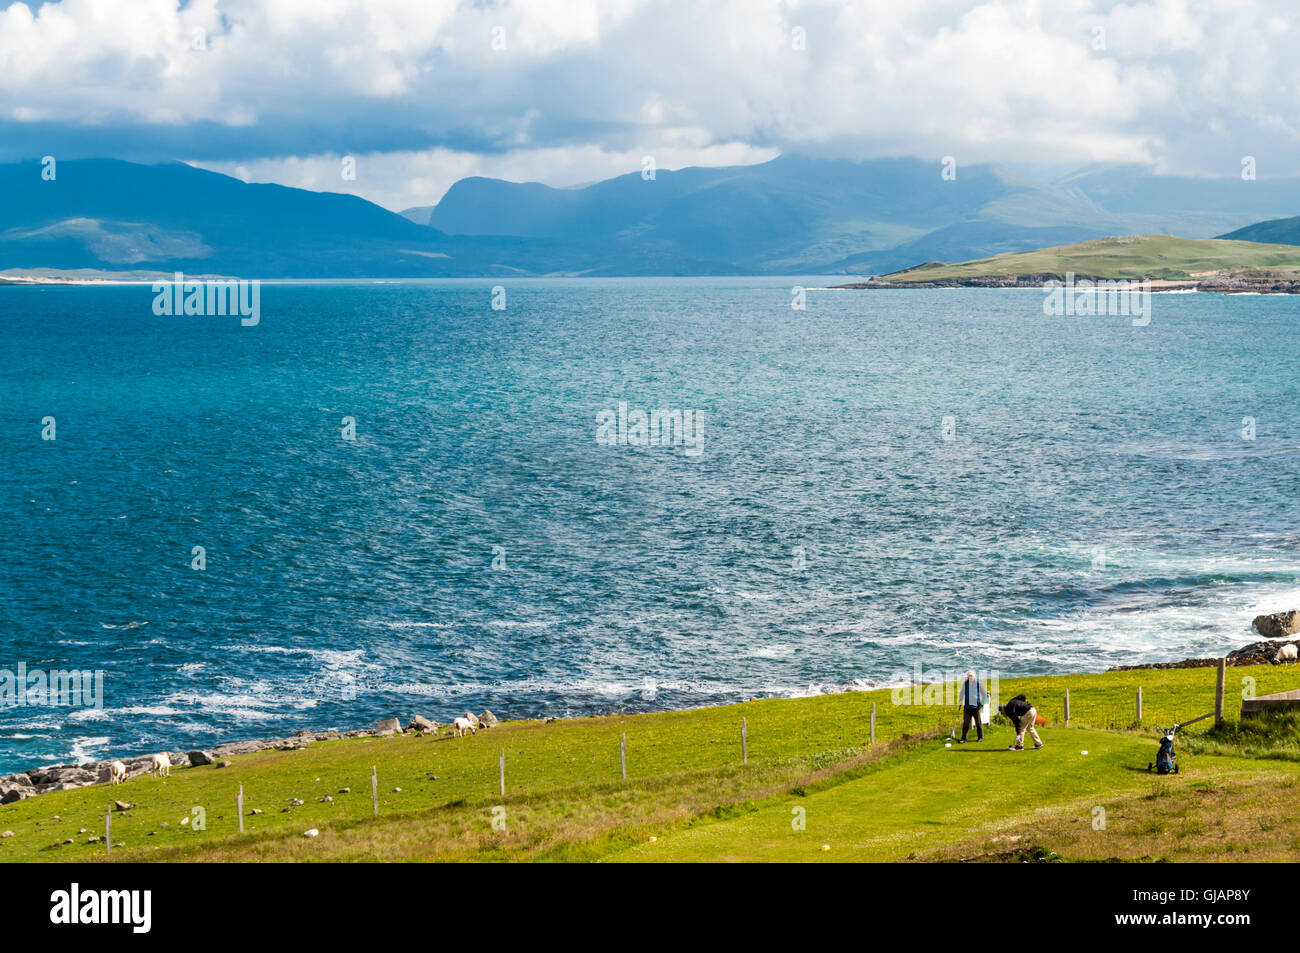 Two golfers teeing off at Isle Of Harris Golf Course in the Outer Hebrides with Sound of Taransay and North Harris in background Stock Photo